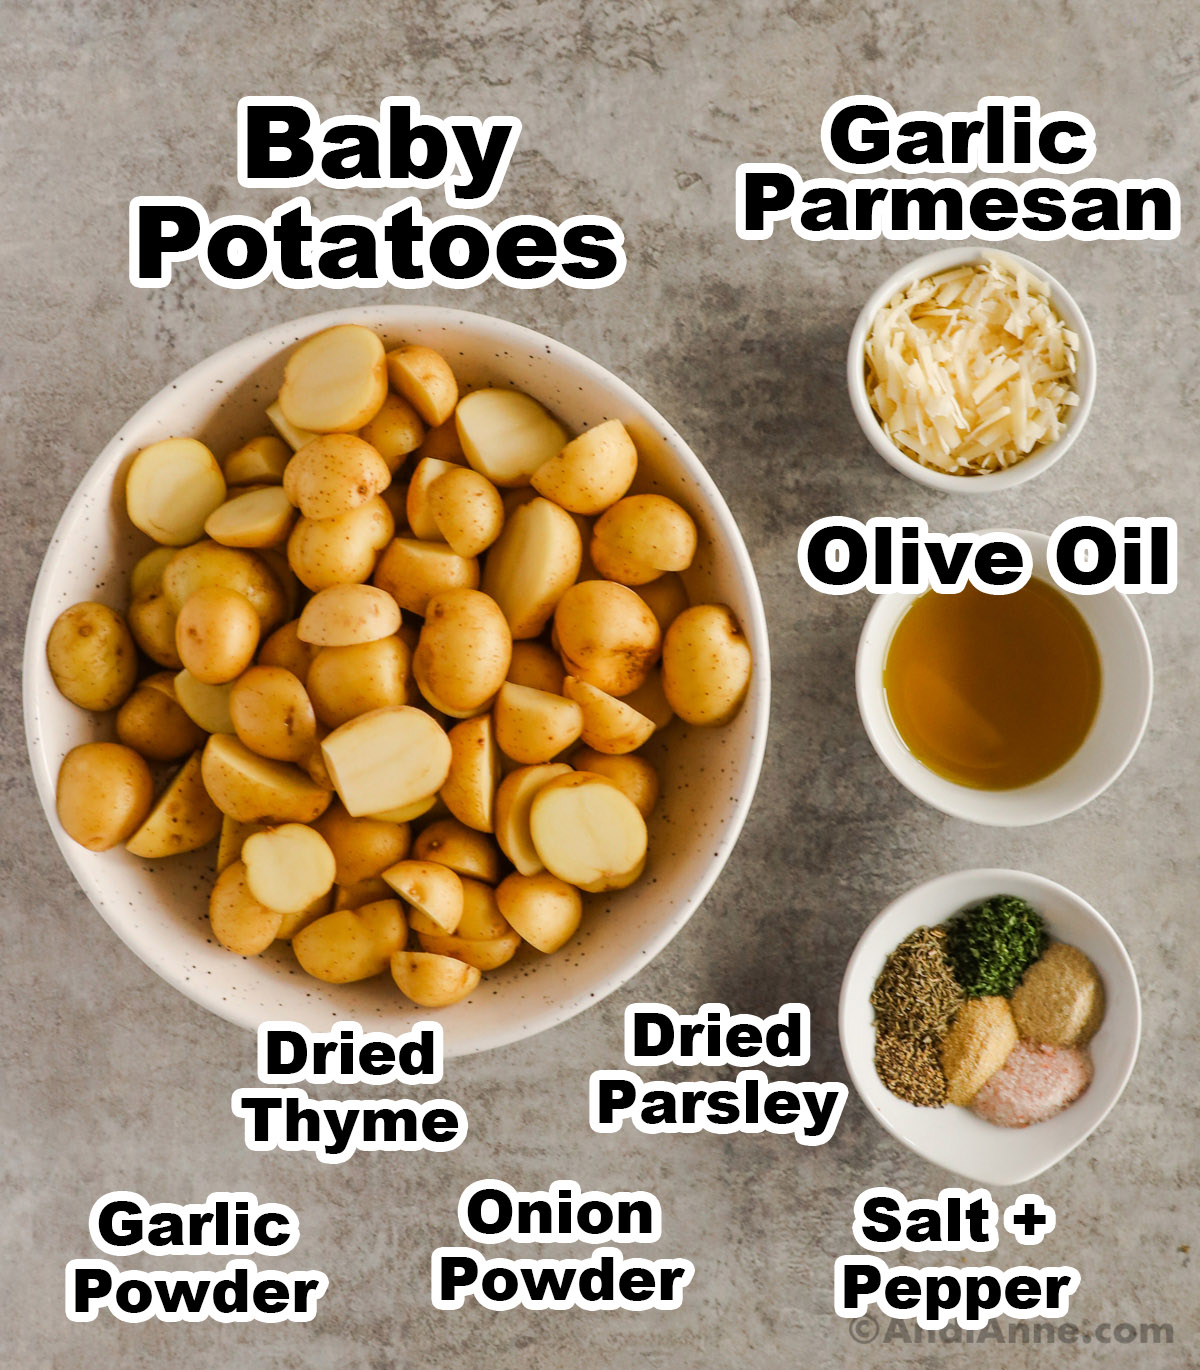 Recipe ingredients in bowls including sliced baby potatoes, grated parmesan, olive oil, and spices.